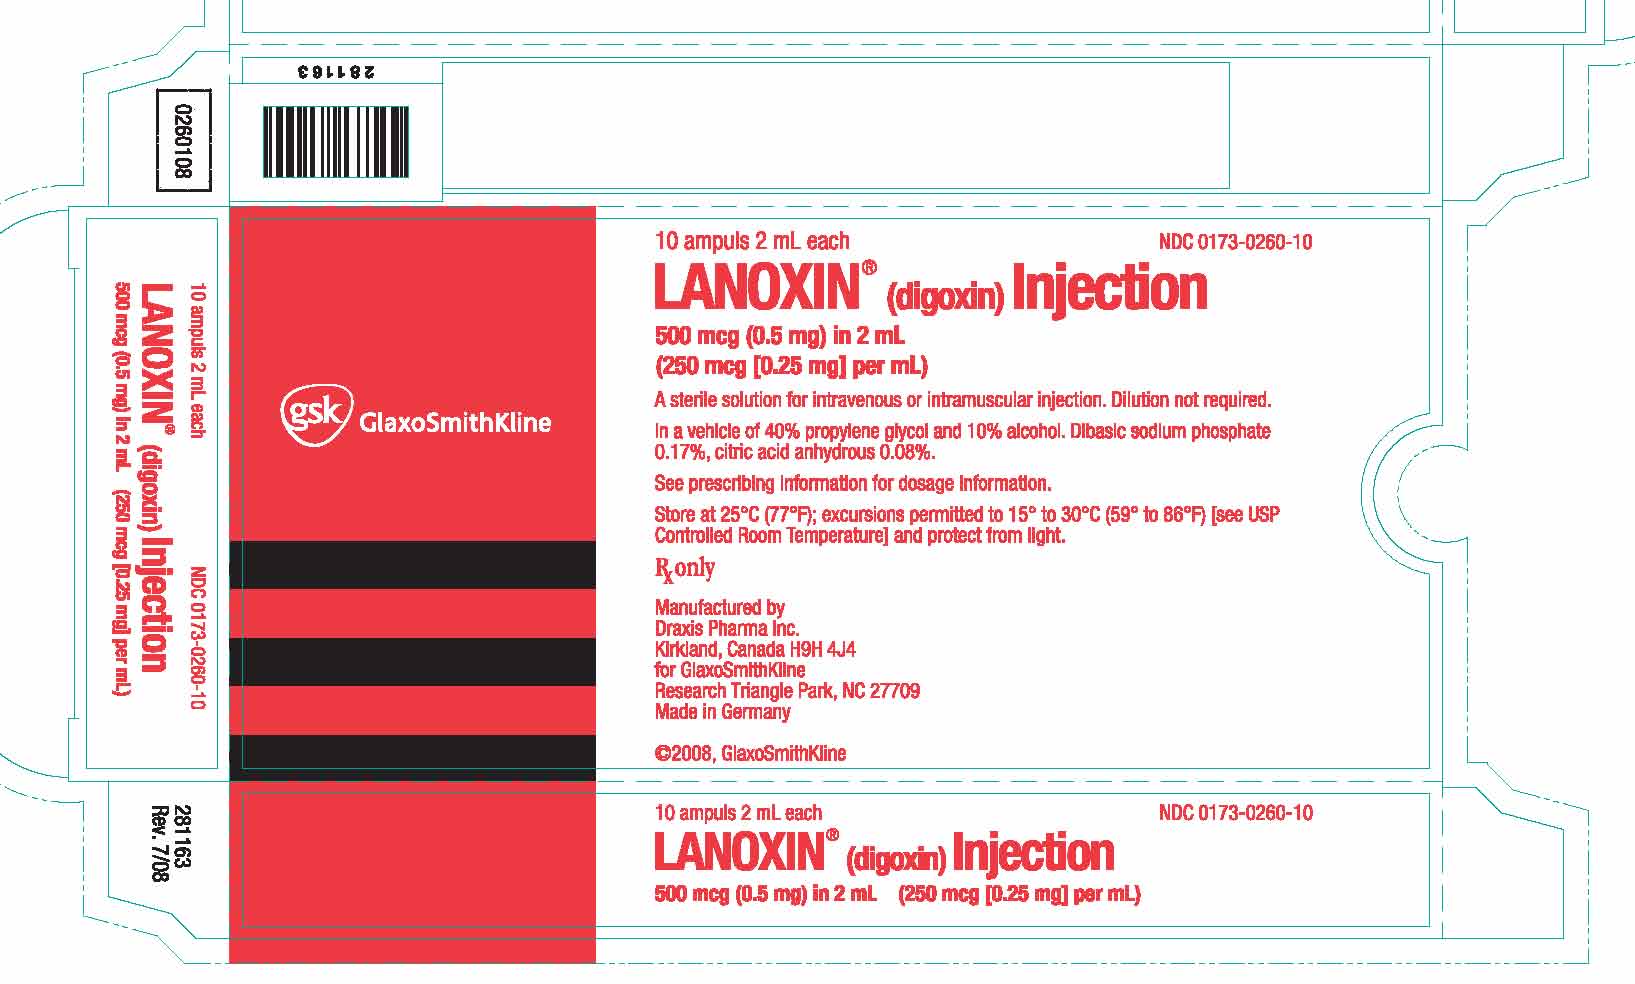 Lanoxin Injection label